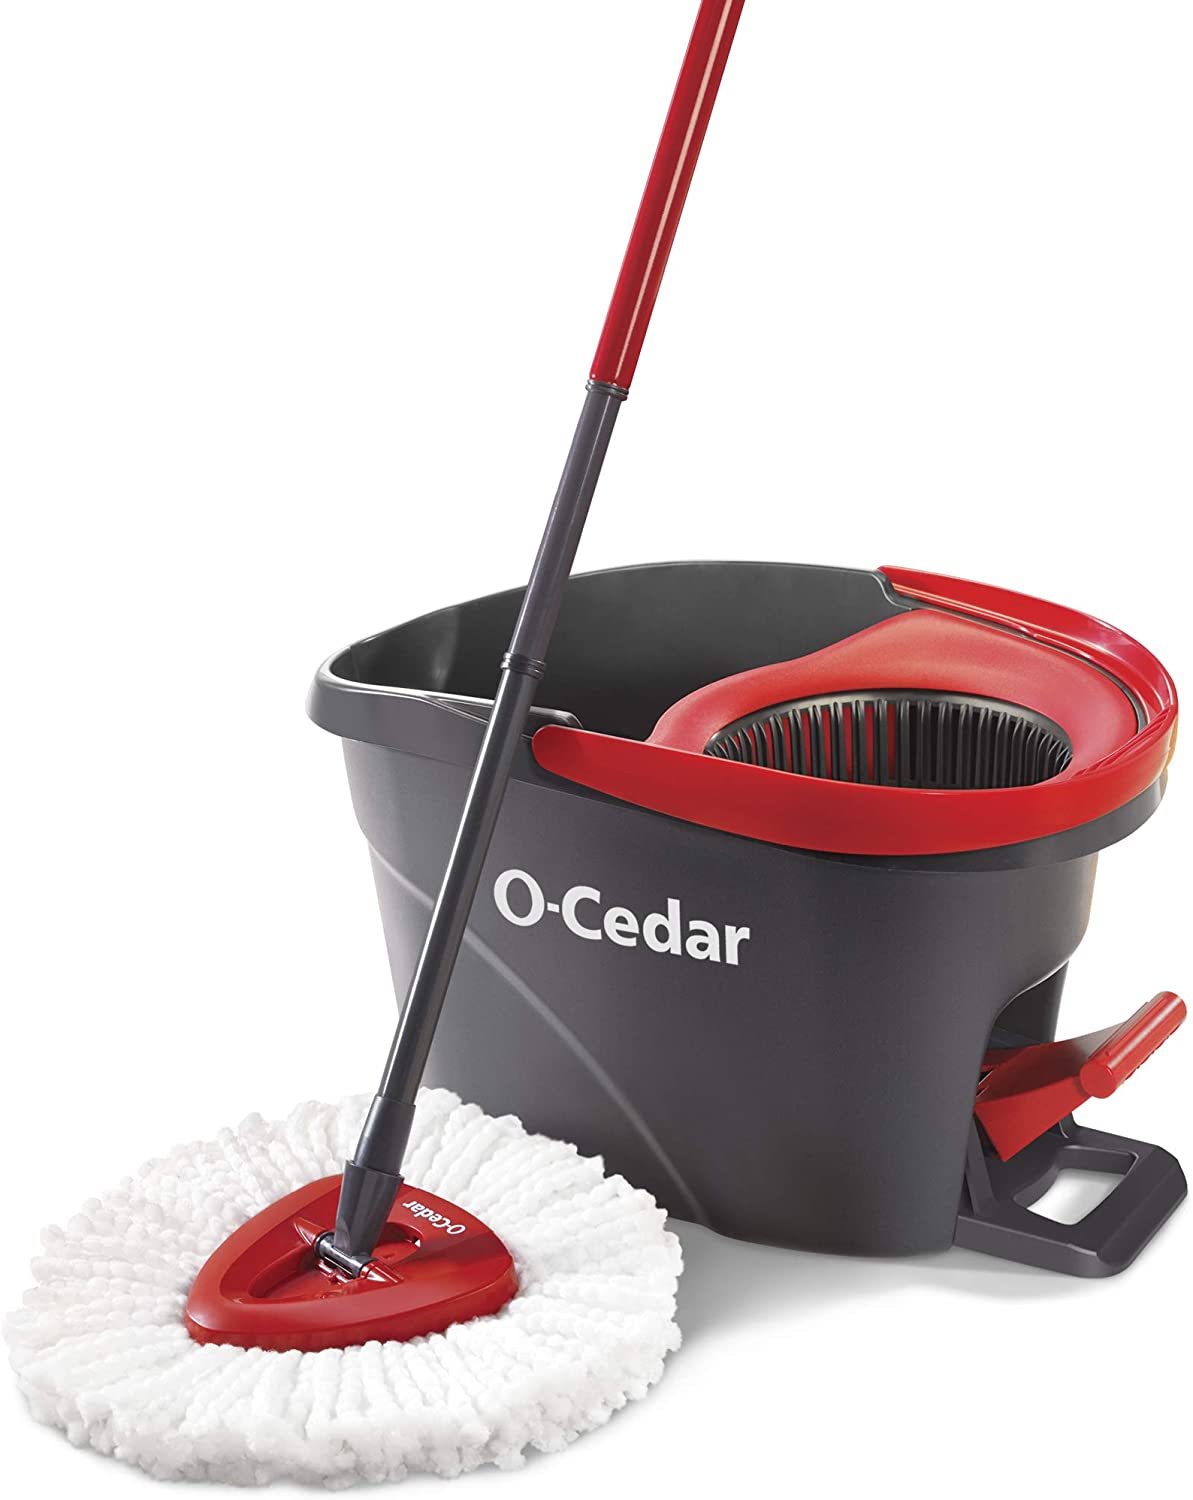 O-Cedar EasyWring Microfiber Spin Mop, Bucket Floor Cleaning System, Red, Gray 48